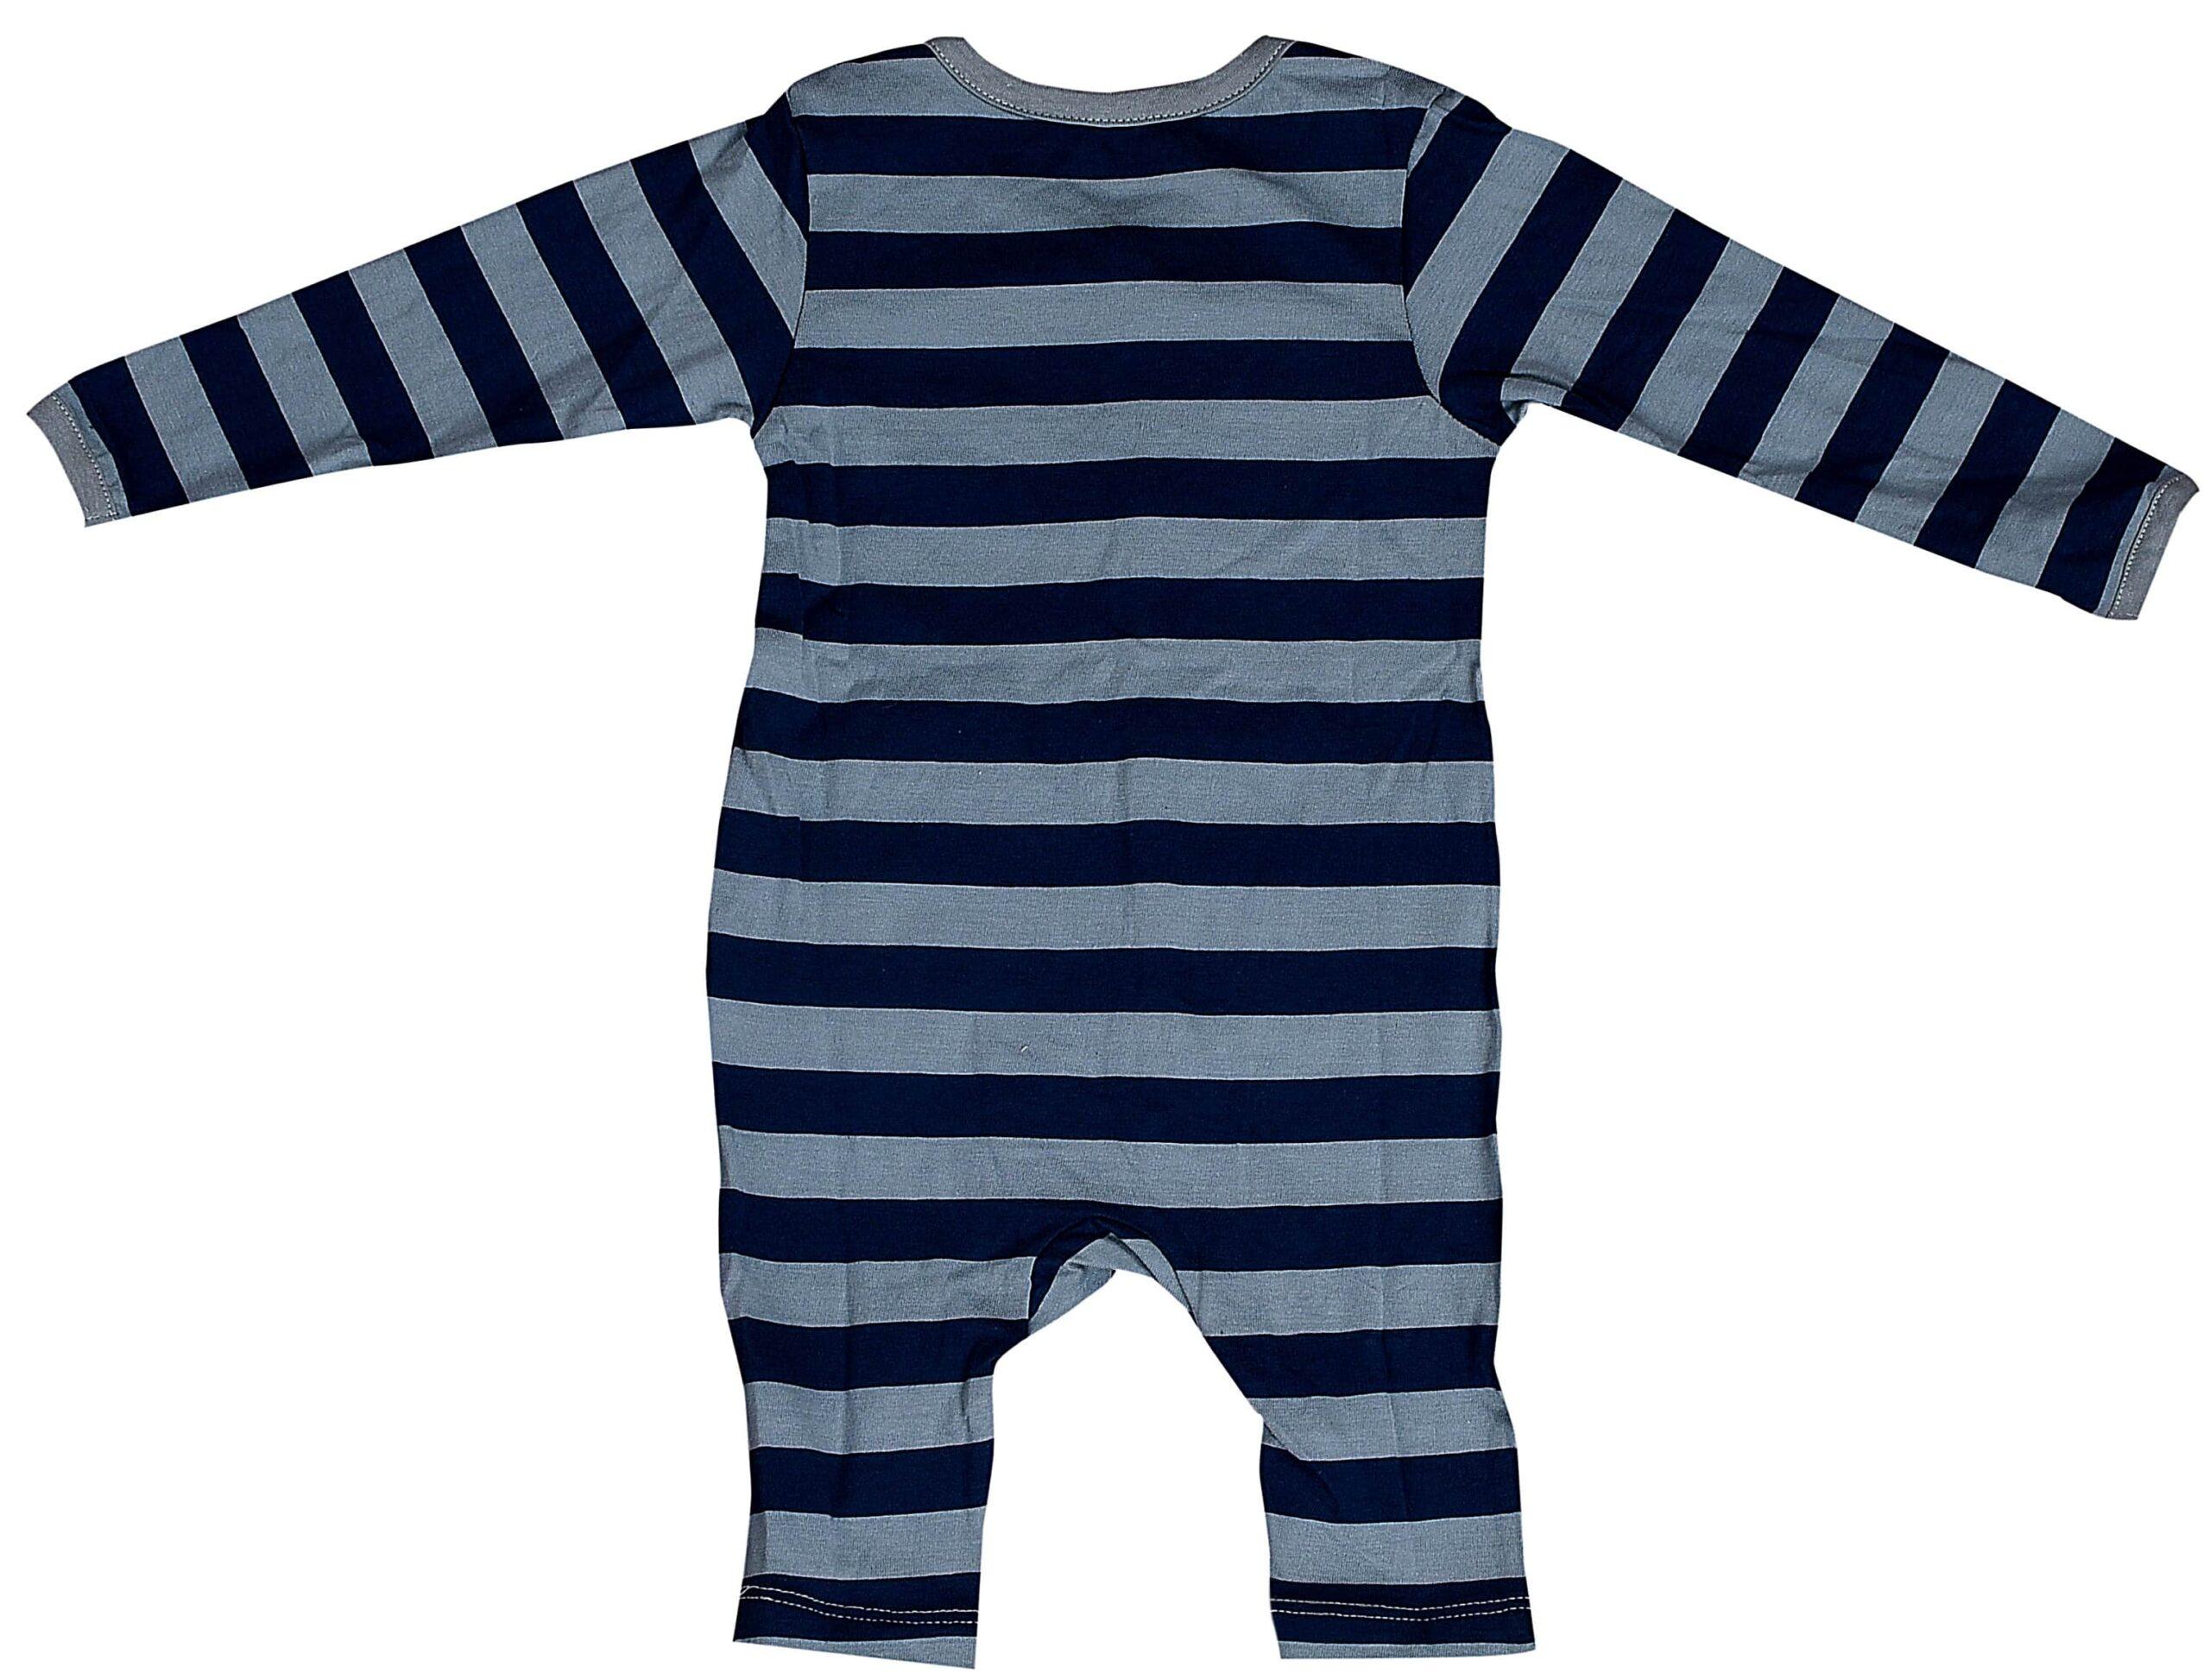 Baby Unisex Sleeping Suit – Grey Strip and Monument Print Pack of 2